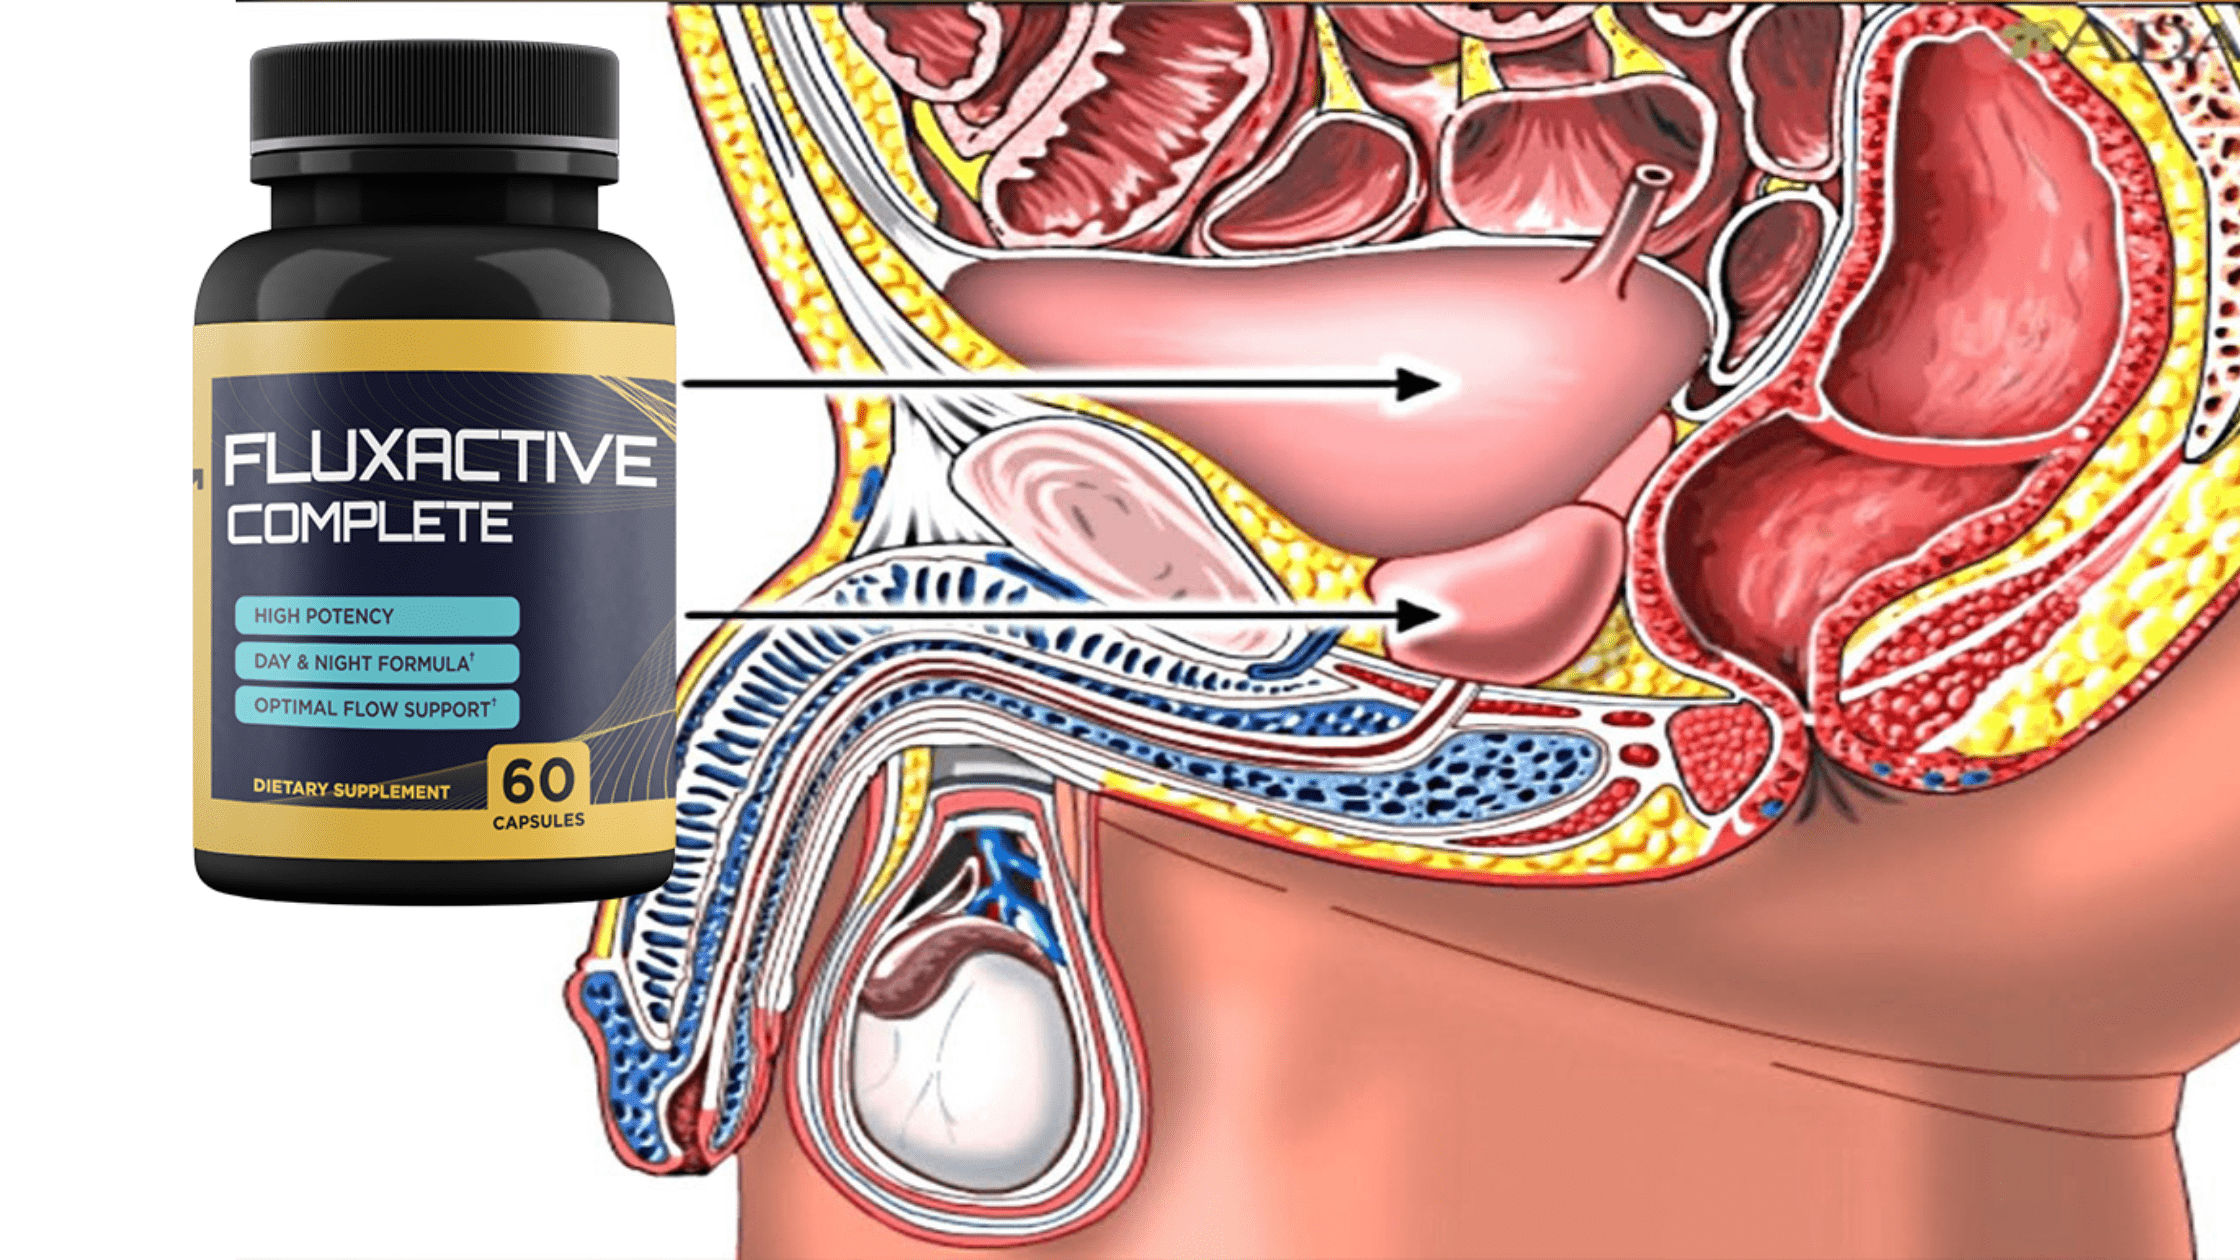 Fluxactive Complete The Natural Solution for Optimal Prostate Health